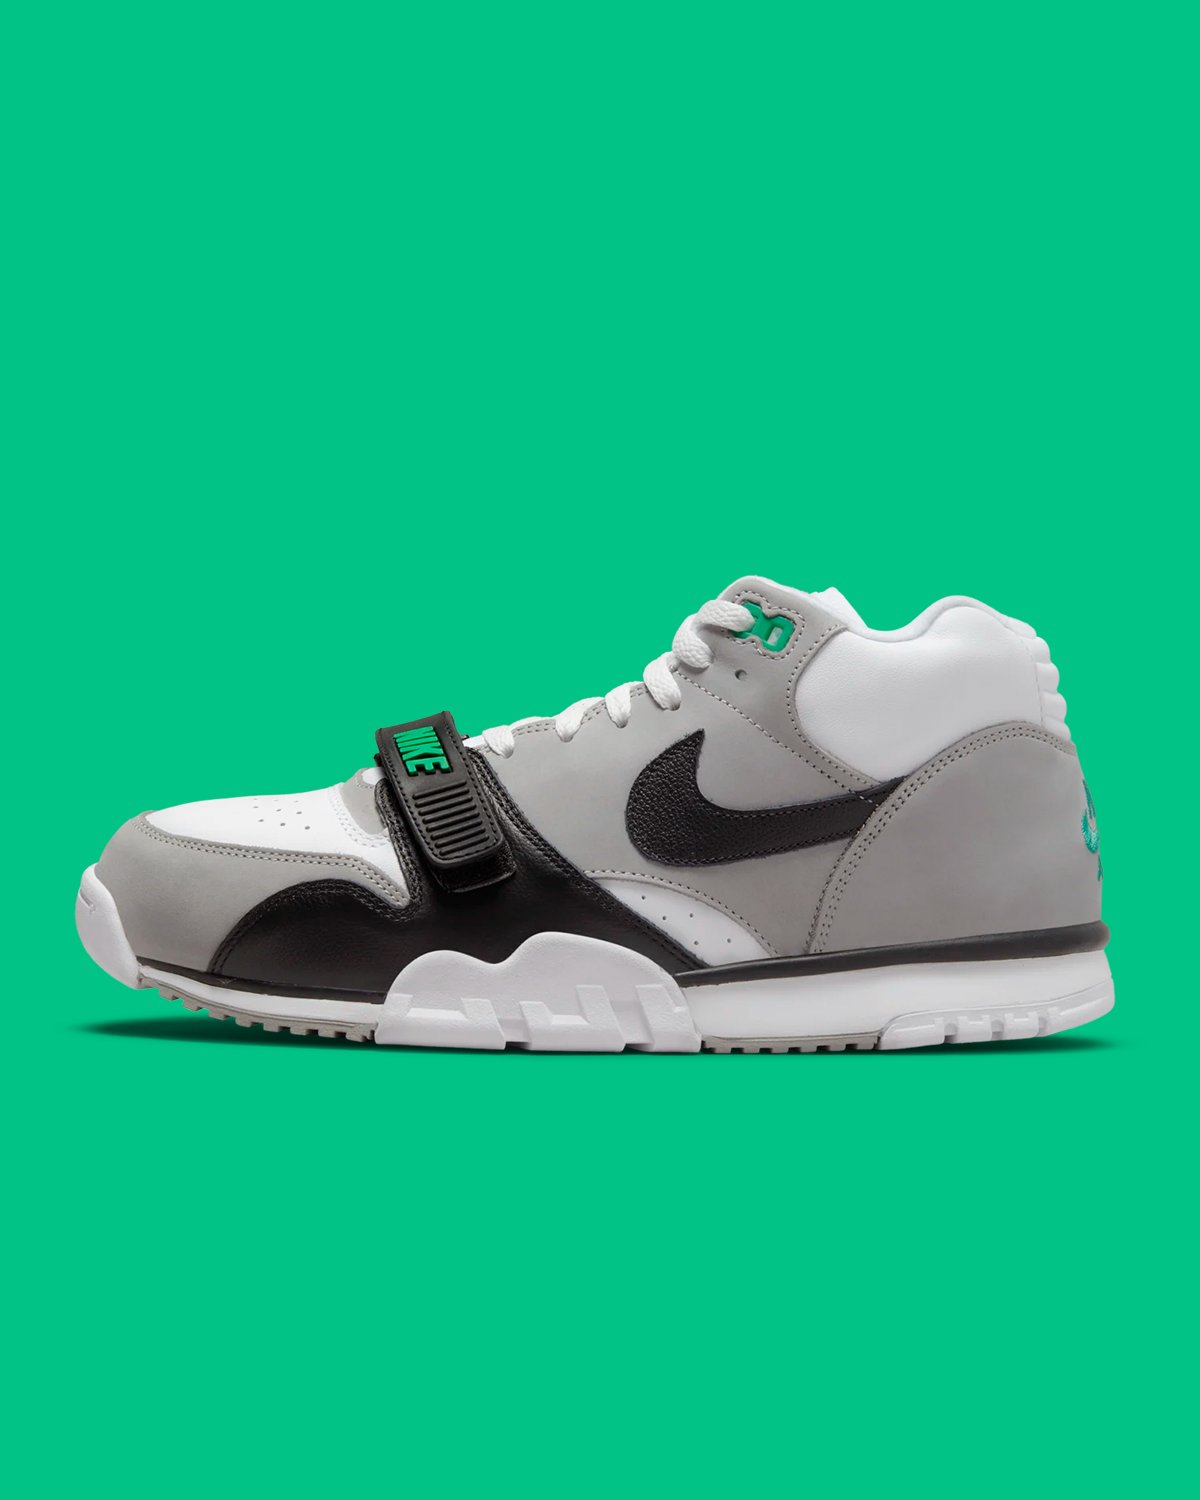 Nike.com on Twitter: "For total sports coverage. The Air Trainer 1 ' Chlorophyll' Available 10am ET 🇺🇸 https://t.co/Sw1qyKFA0O https://t.co/kv66S9IWkd" / Twitter